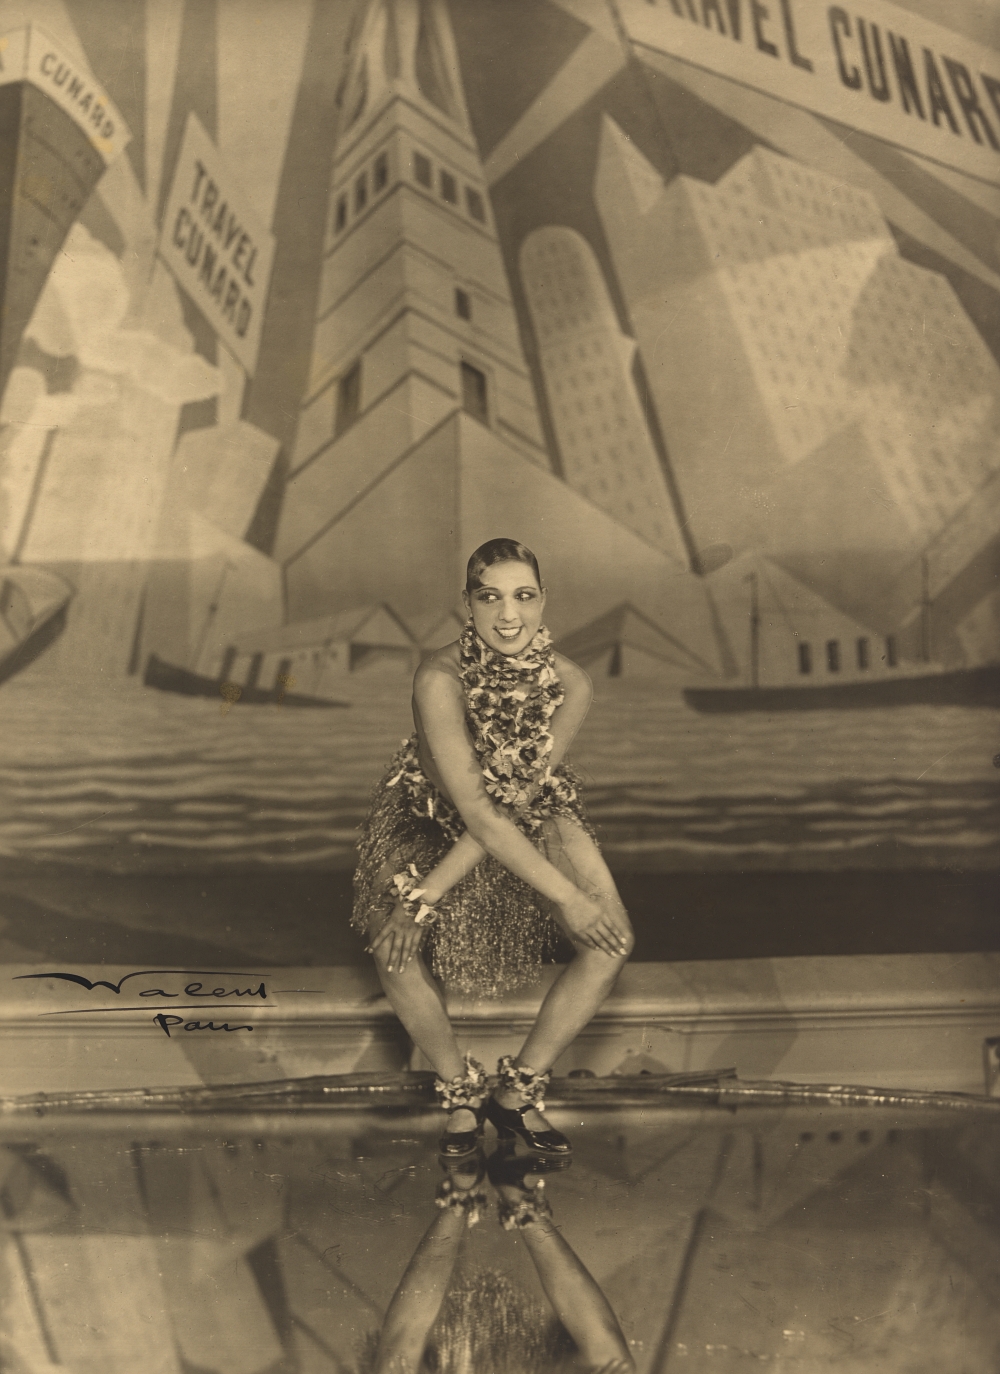 Josephine Baker on stage in 1926